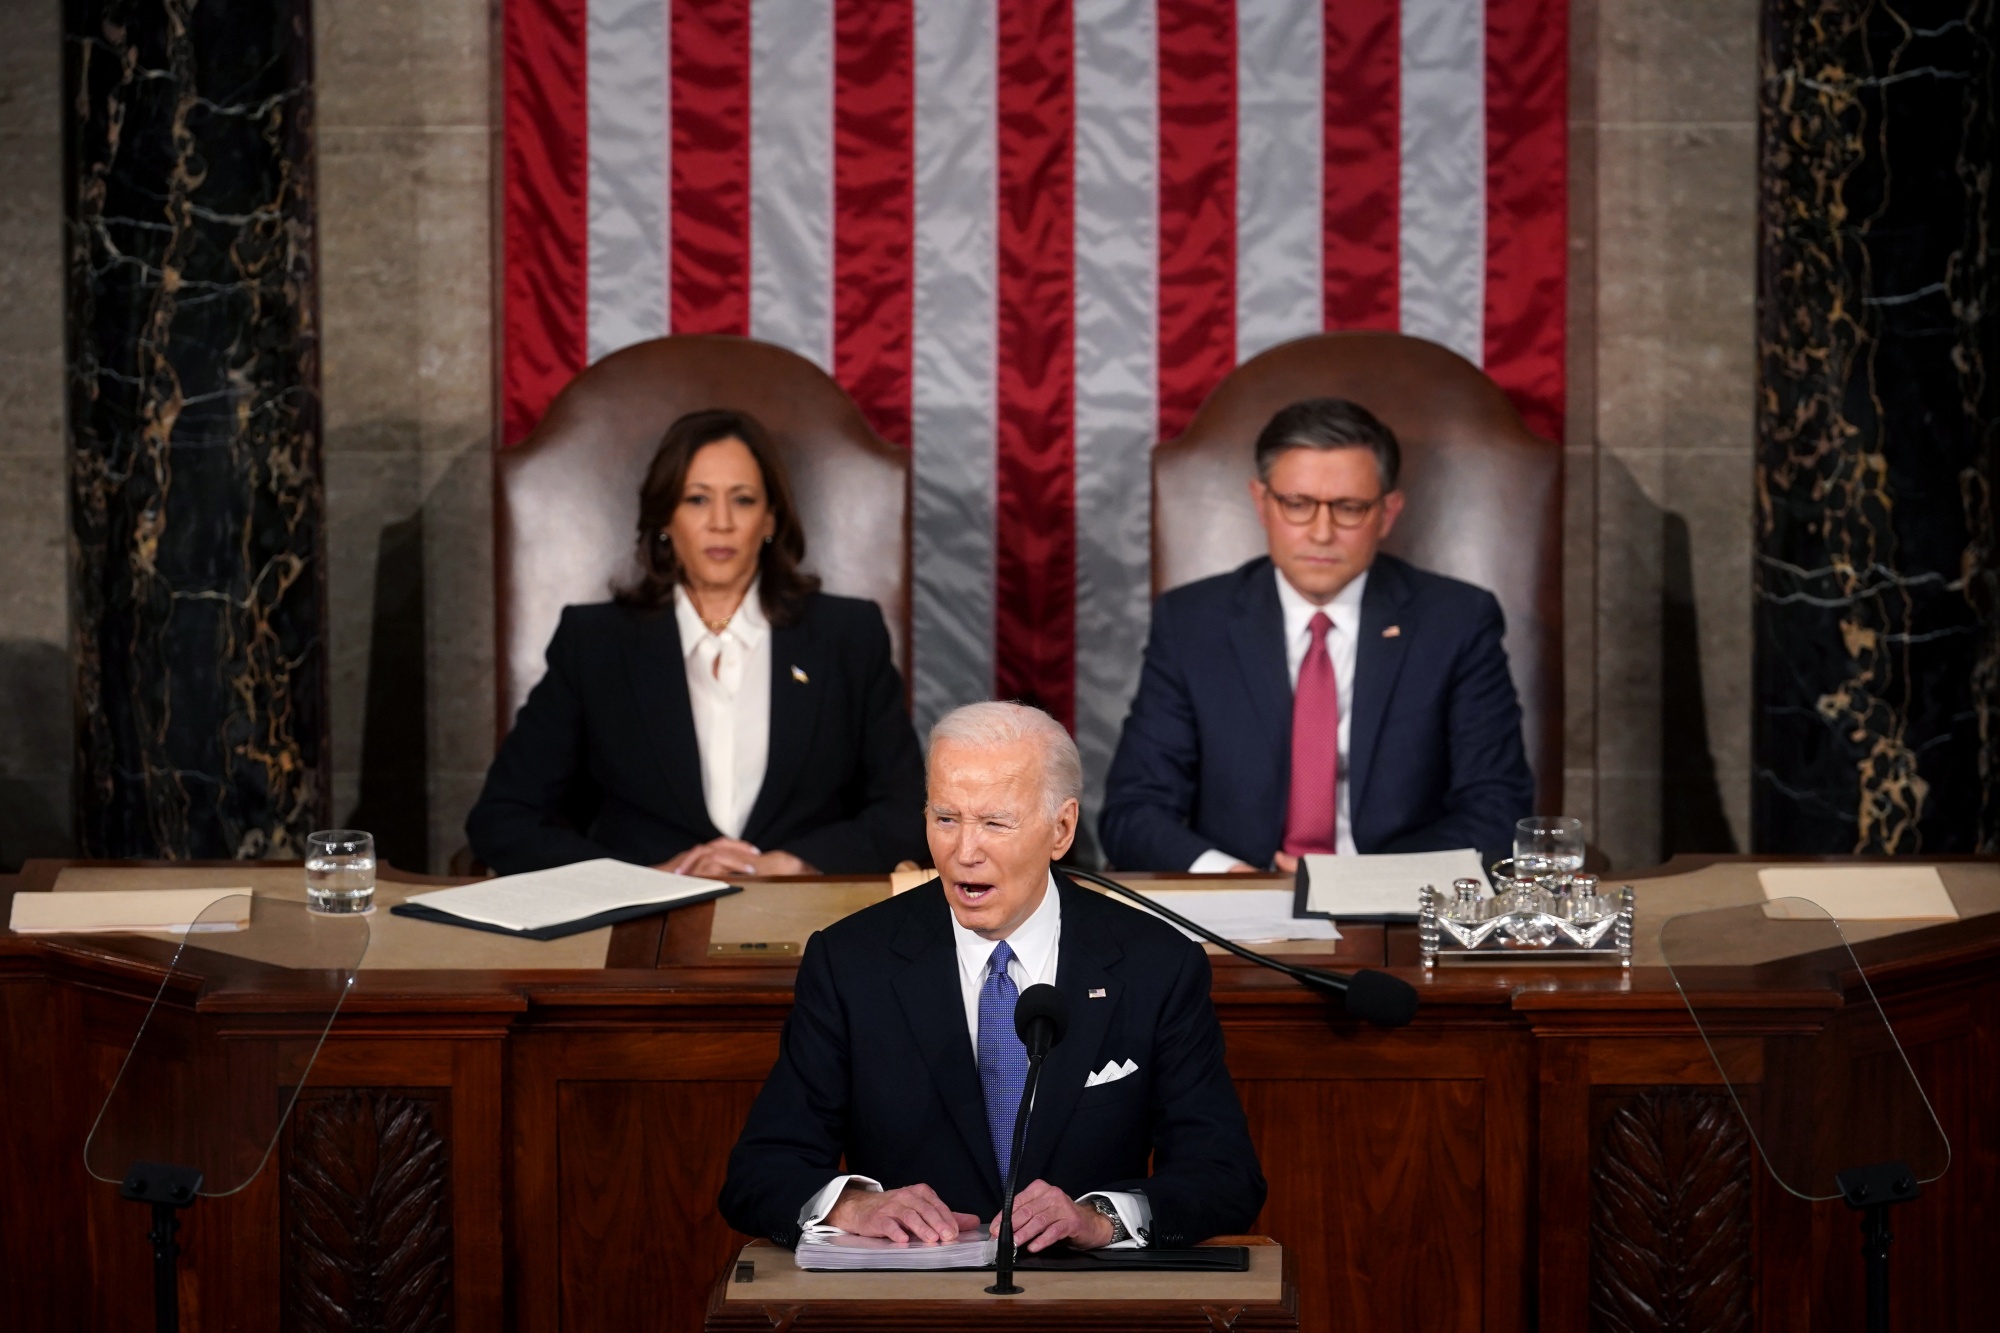 Joe Biden's State of the Union: A Critical Examination of Leadership, Policy, and America's Future.